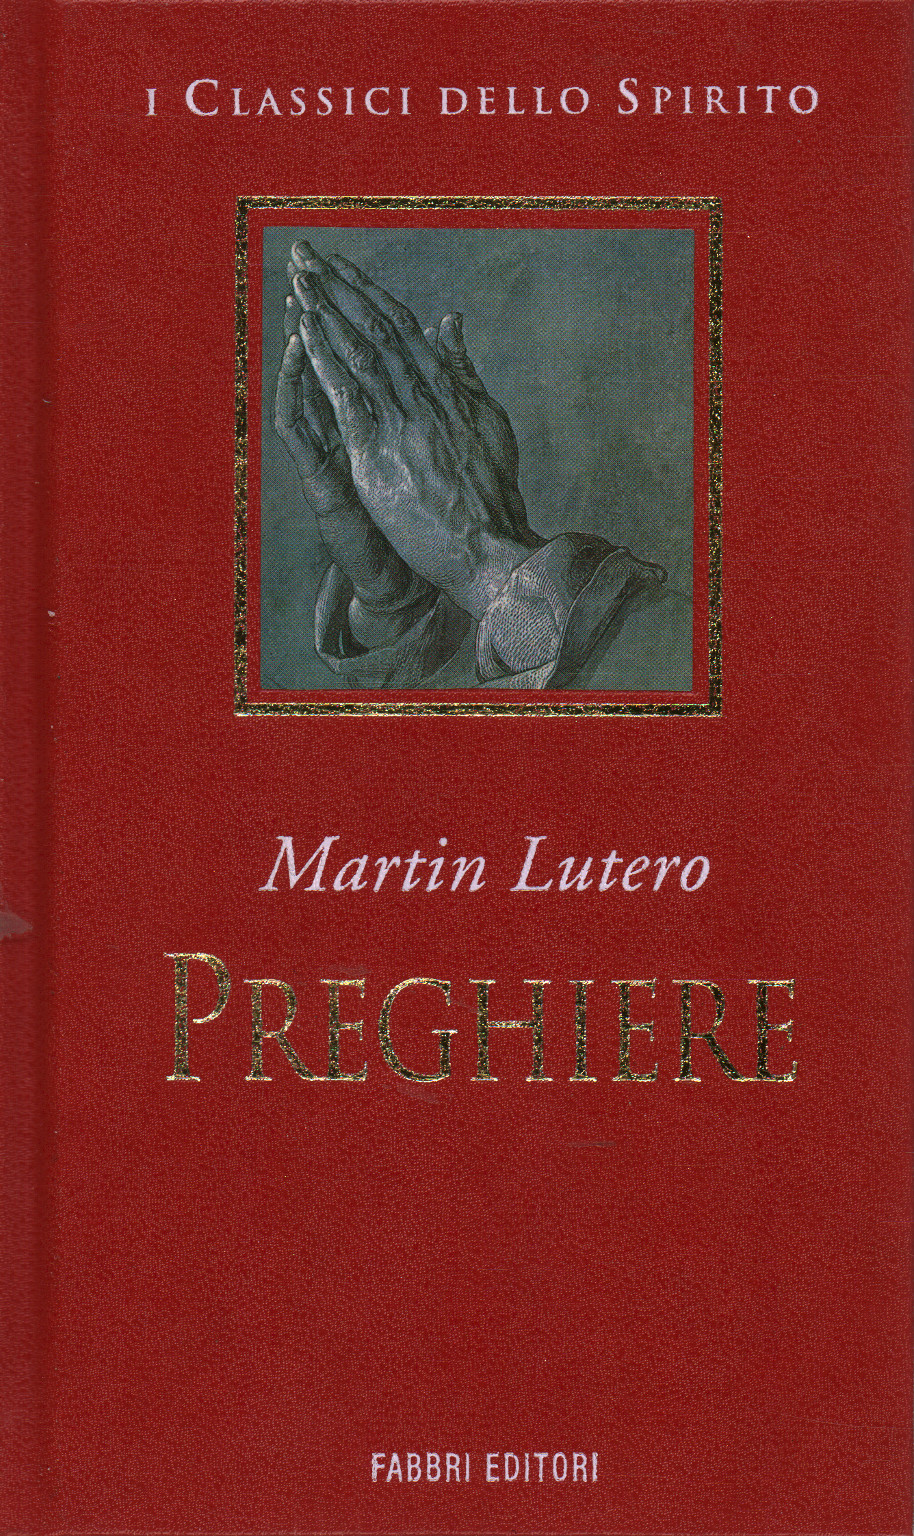 Prières, Martin Luther